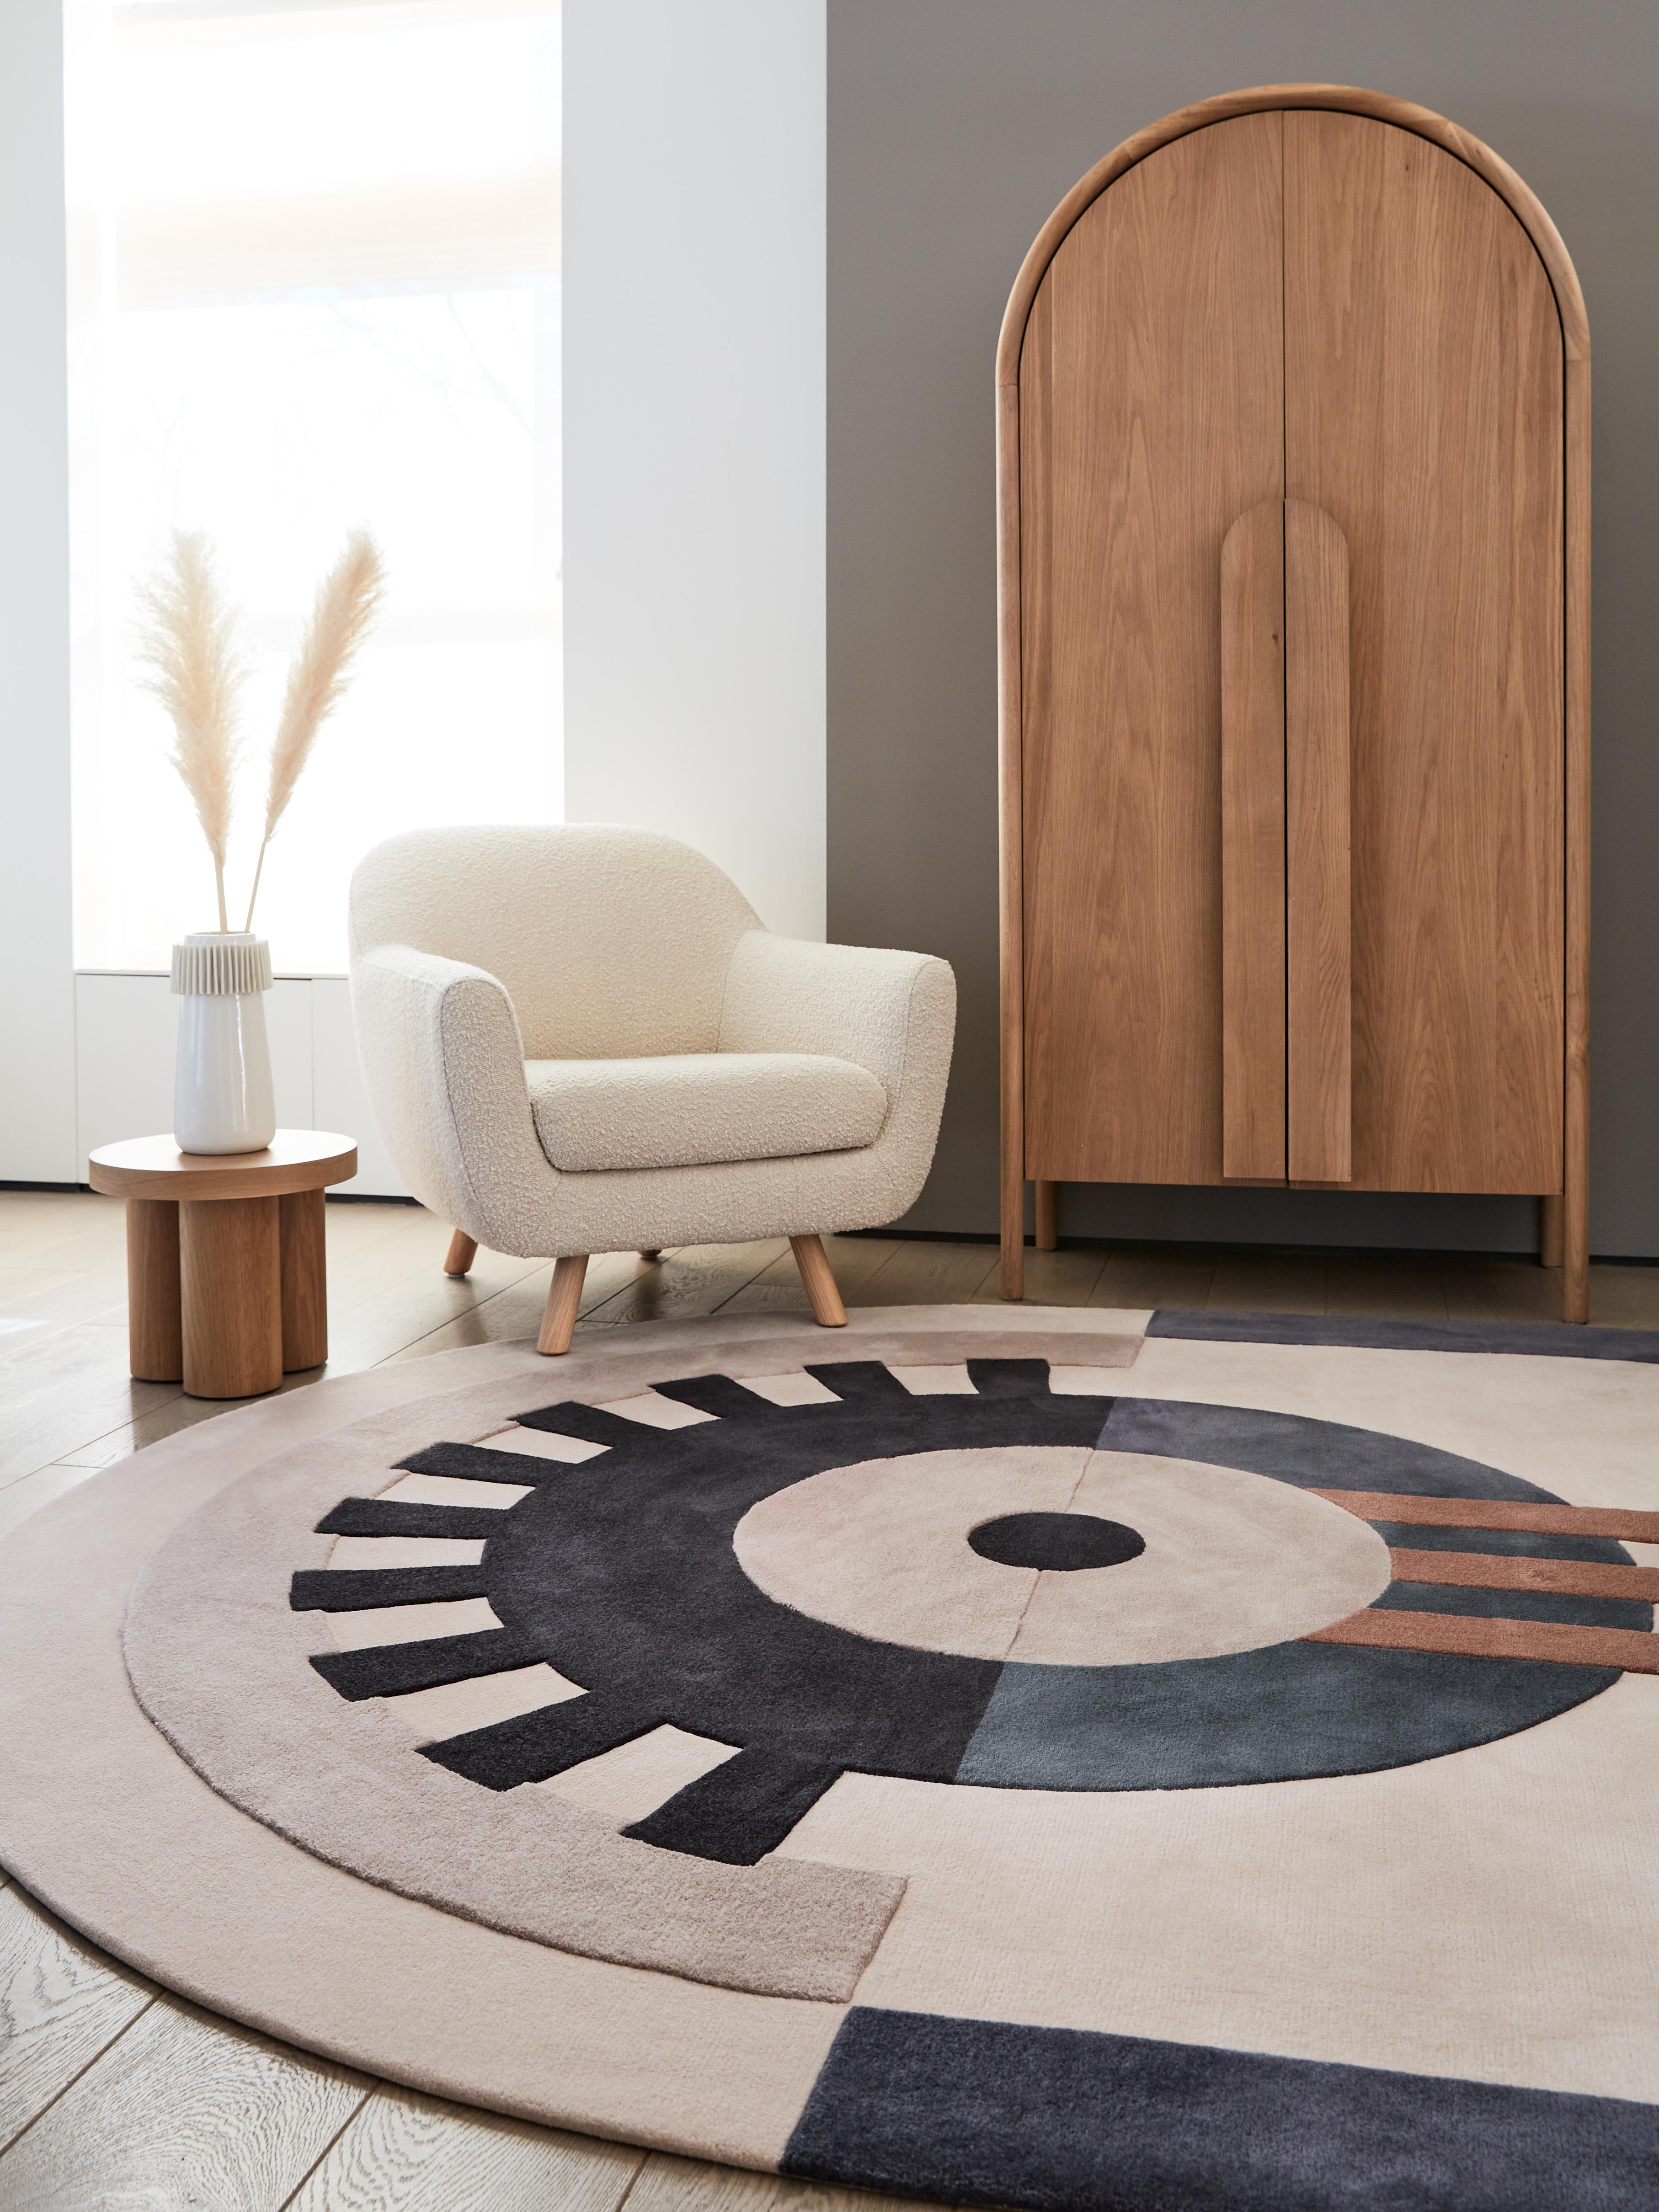 The Houri Rug is crafted from pure New Zealand wool, naturally dyed without any harmful chemicals. Each thread is meticulously woven by hand by skilled weavers from a family business with four generations of experience in carpet weaving. The Houri